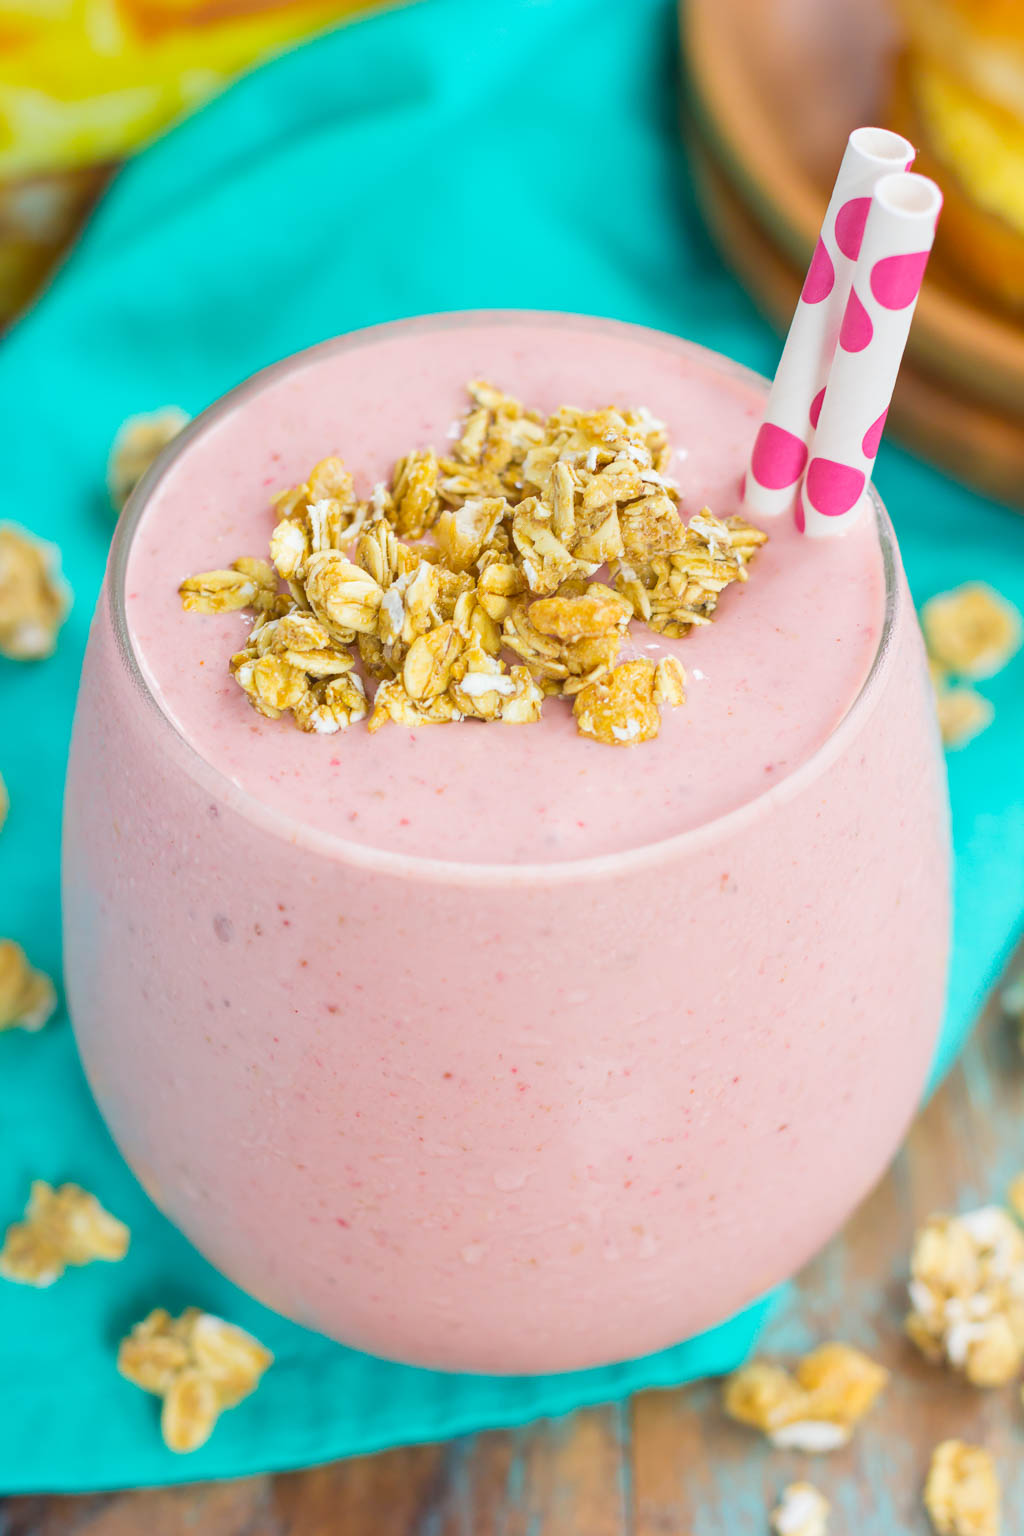 This Peanut Butter and Jelly Granola Smoothie is thick, creamy, and packed with a classic peanut butter and jelly taste, in drink form. Filled with frozen strawberries, vanilla Greek yogurt, creamy peanut butter, and crunchy granola, this smoothie is ready just minutes and is perfect to serve for just about any meal!